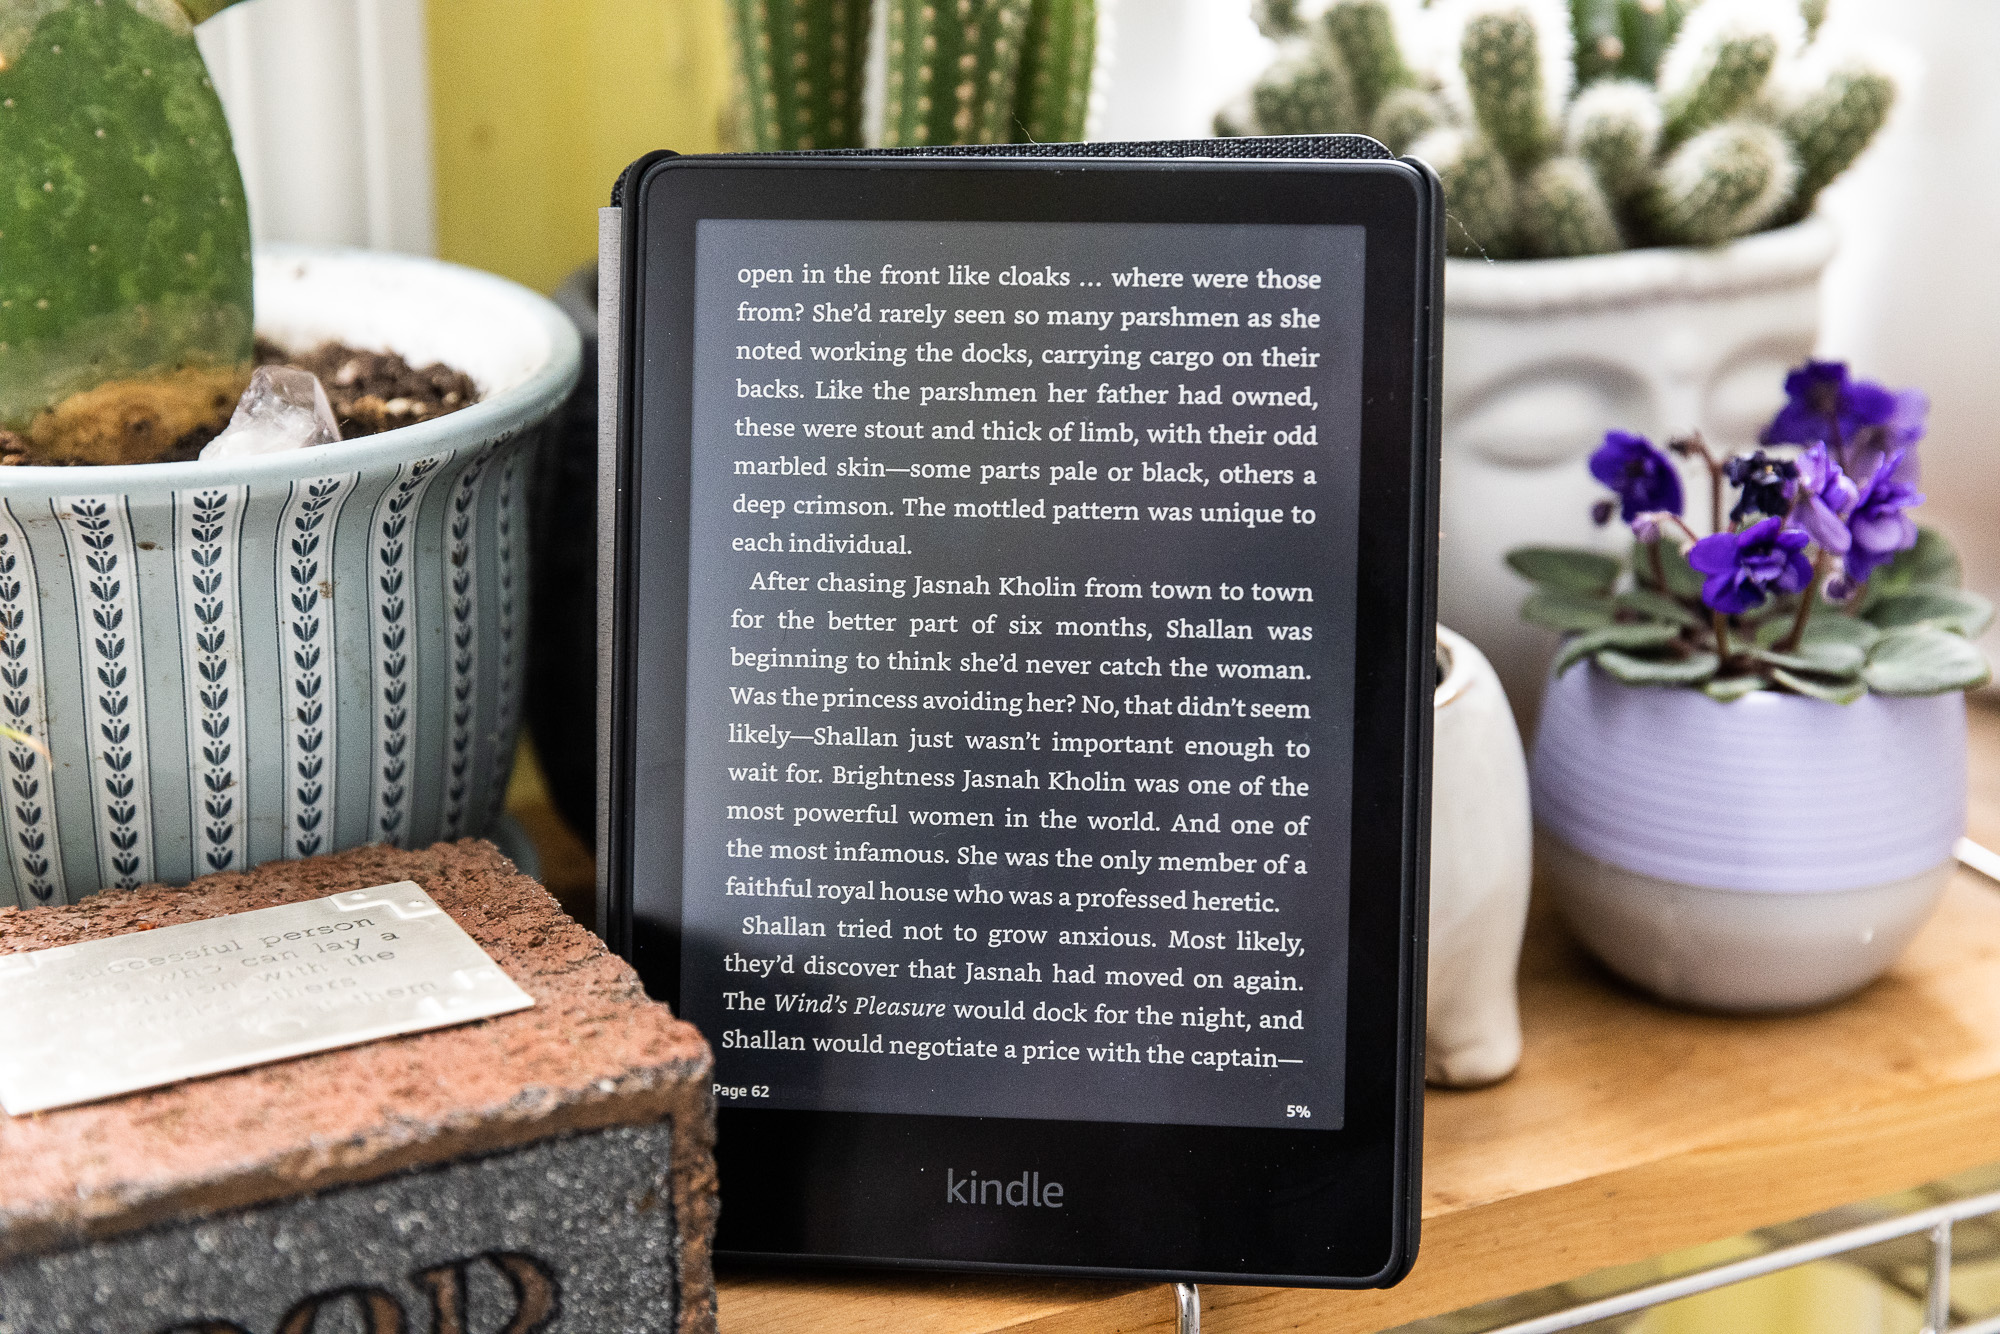 Our favorite Kindle e-reader is down to its cheapest price today at Amazon